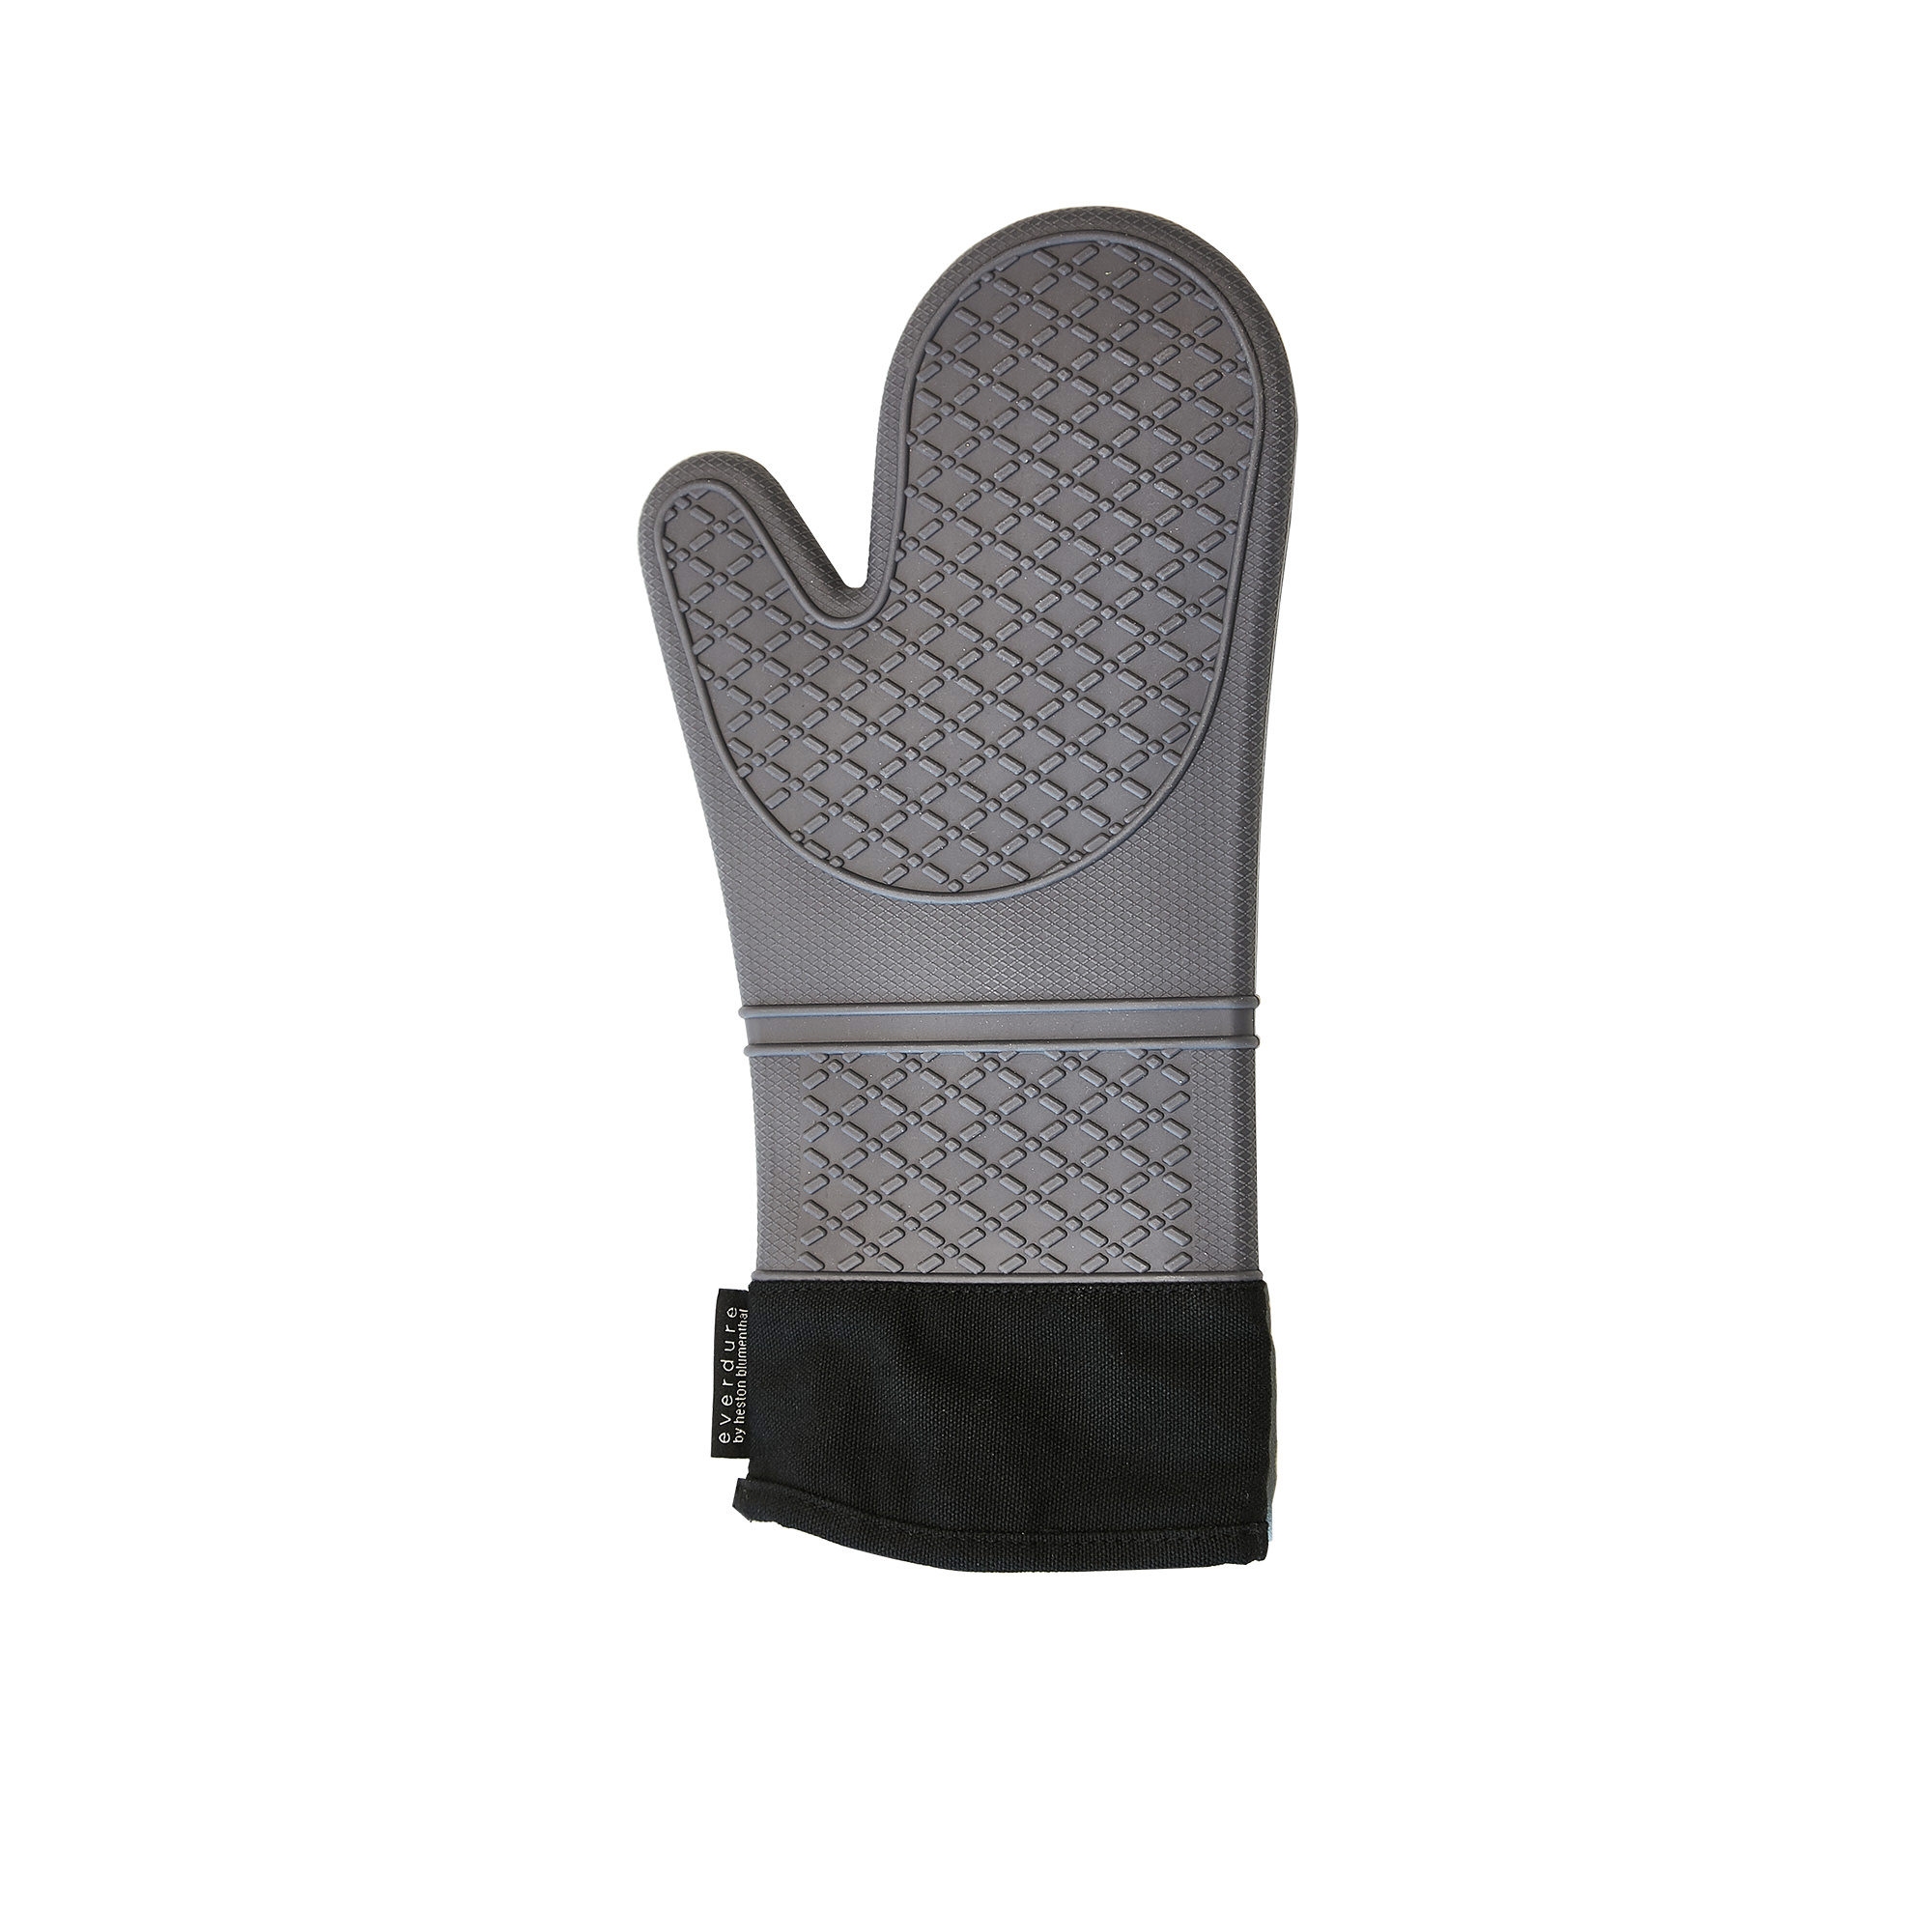 Everdure by Heston Blumenthal Heat-Resistant Silicone Glove Image 1